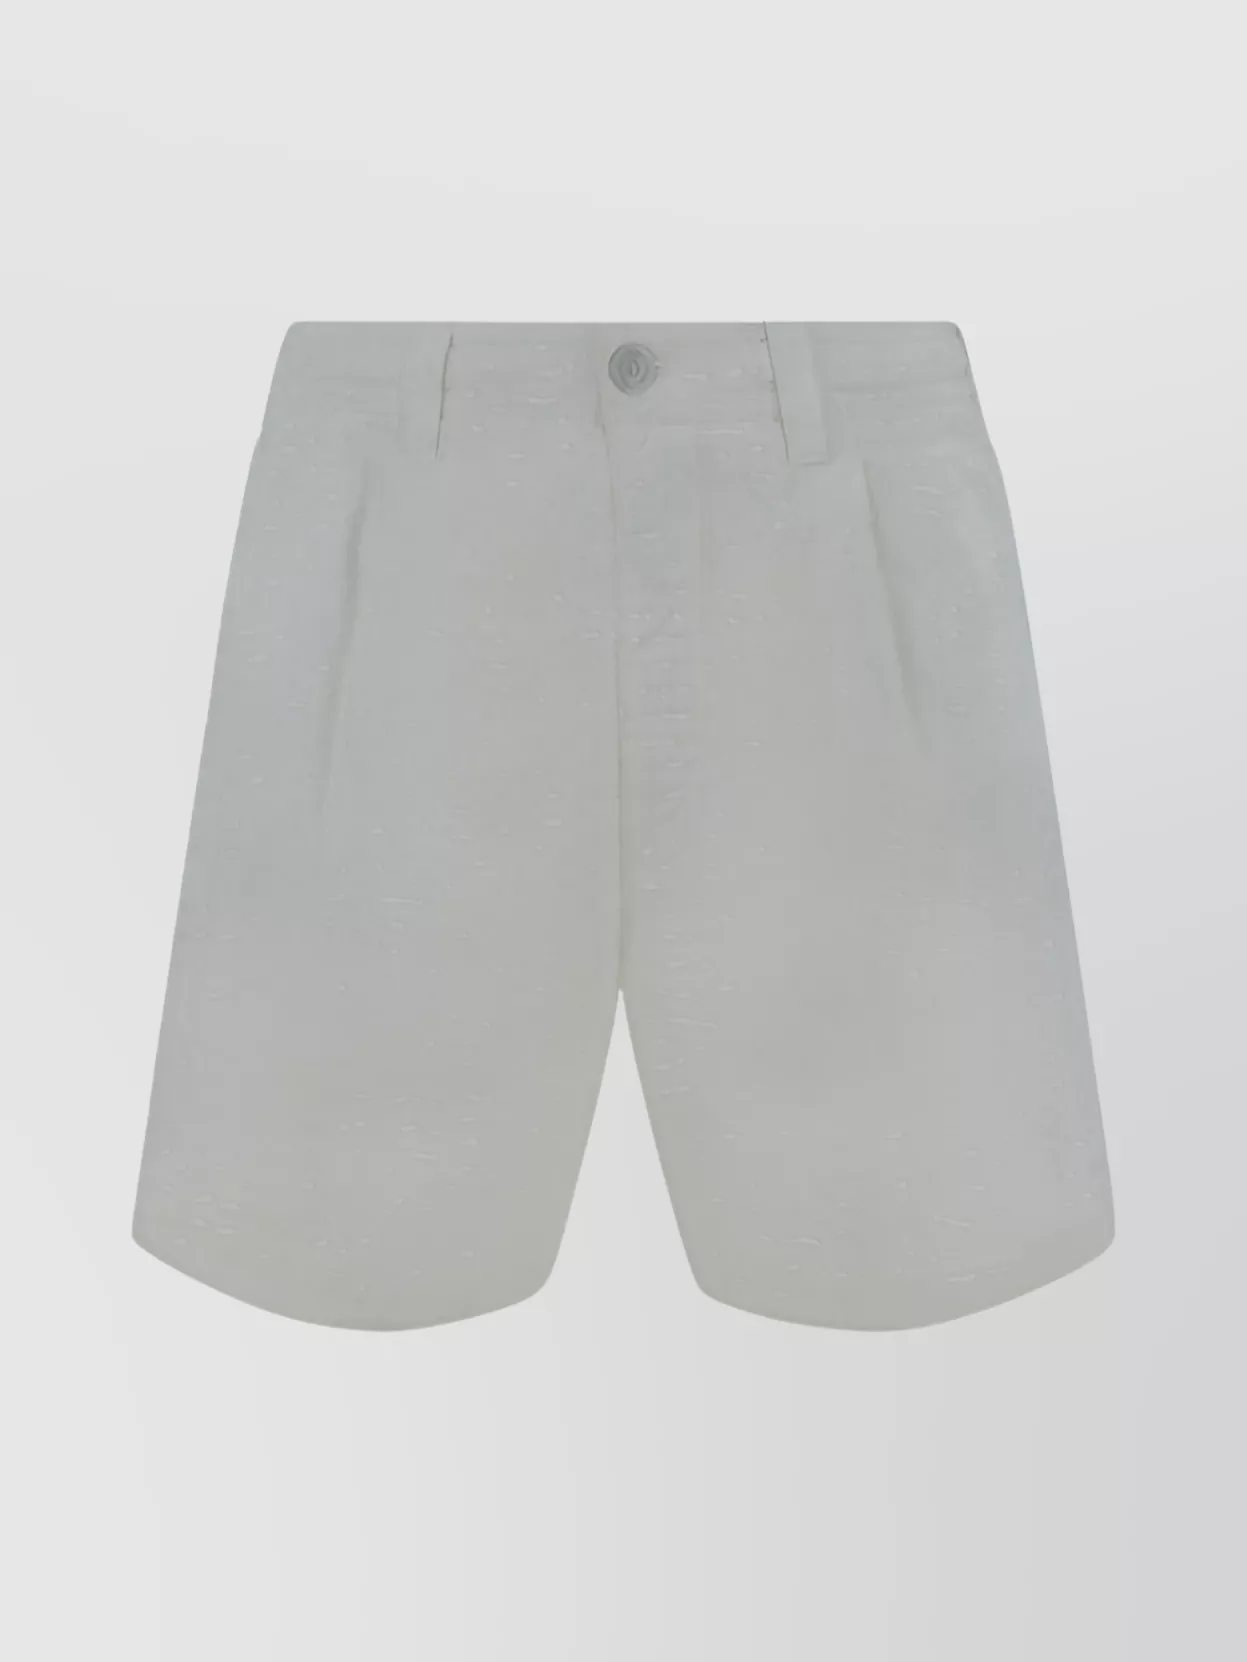 Stone Island Bermuda Shorts With Belt Loops And Pockets In Gray